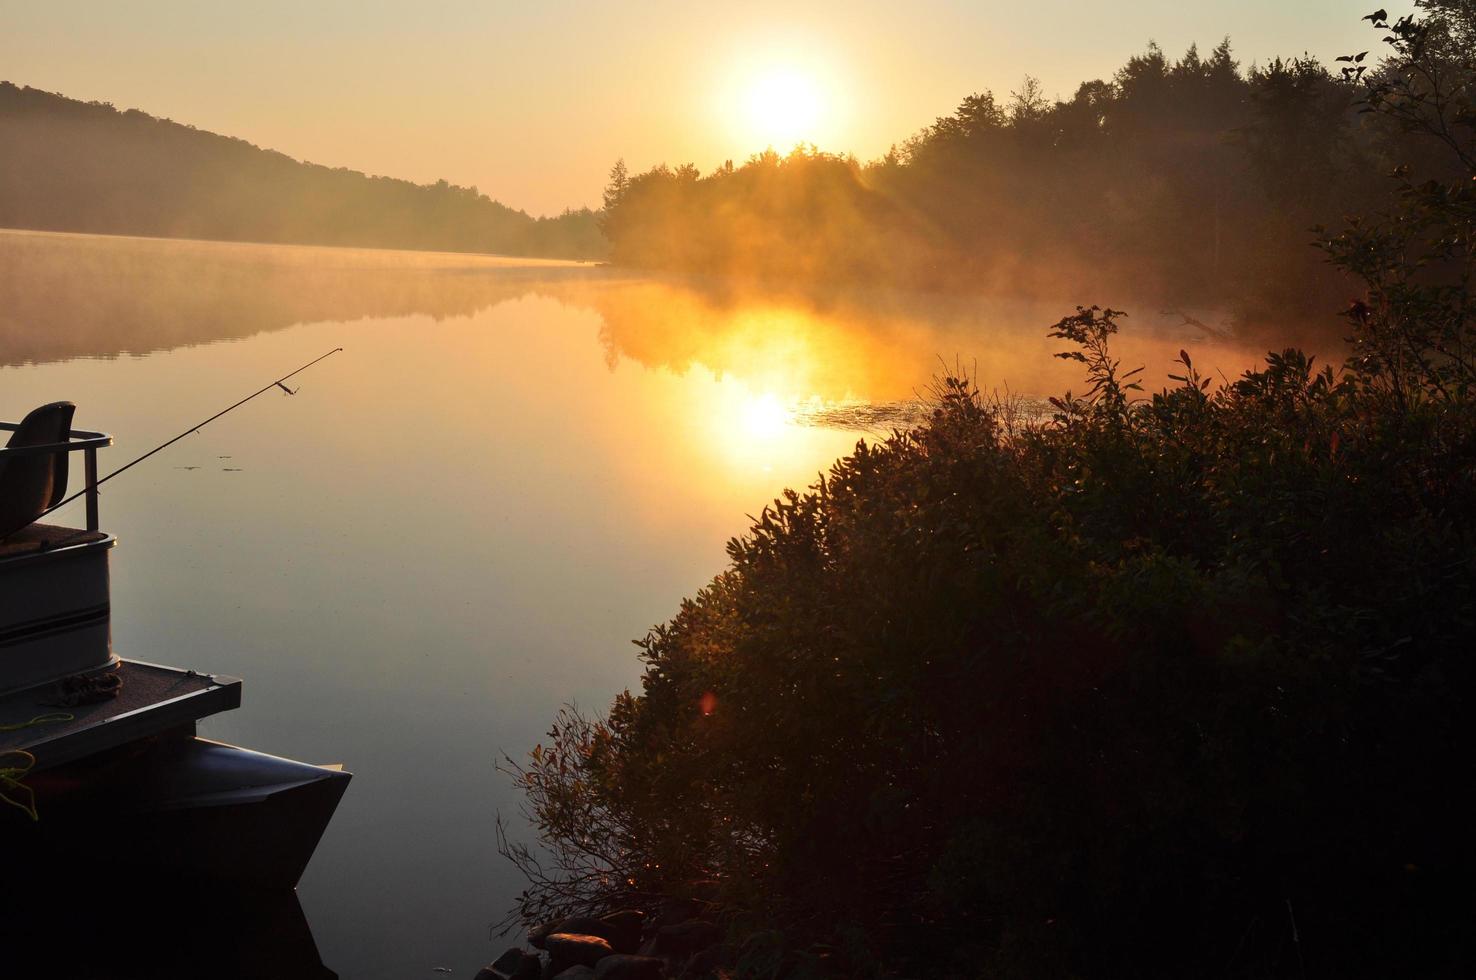 The sun rising over a misty lake with boat in water photo